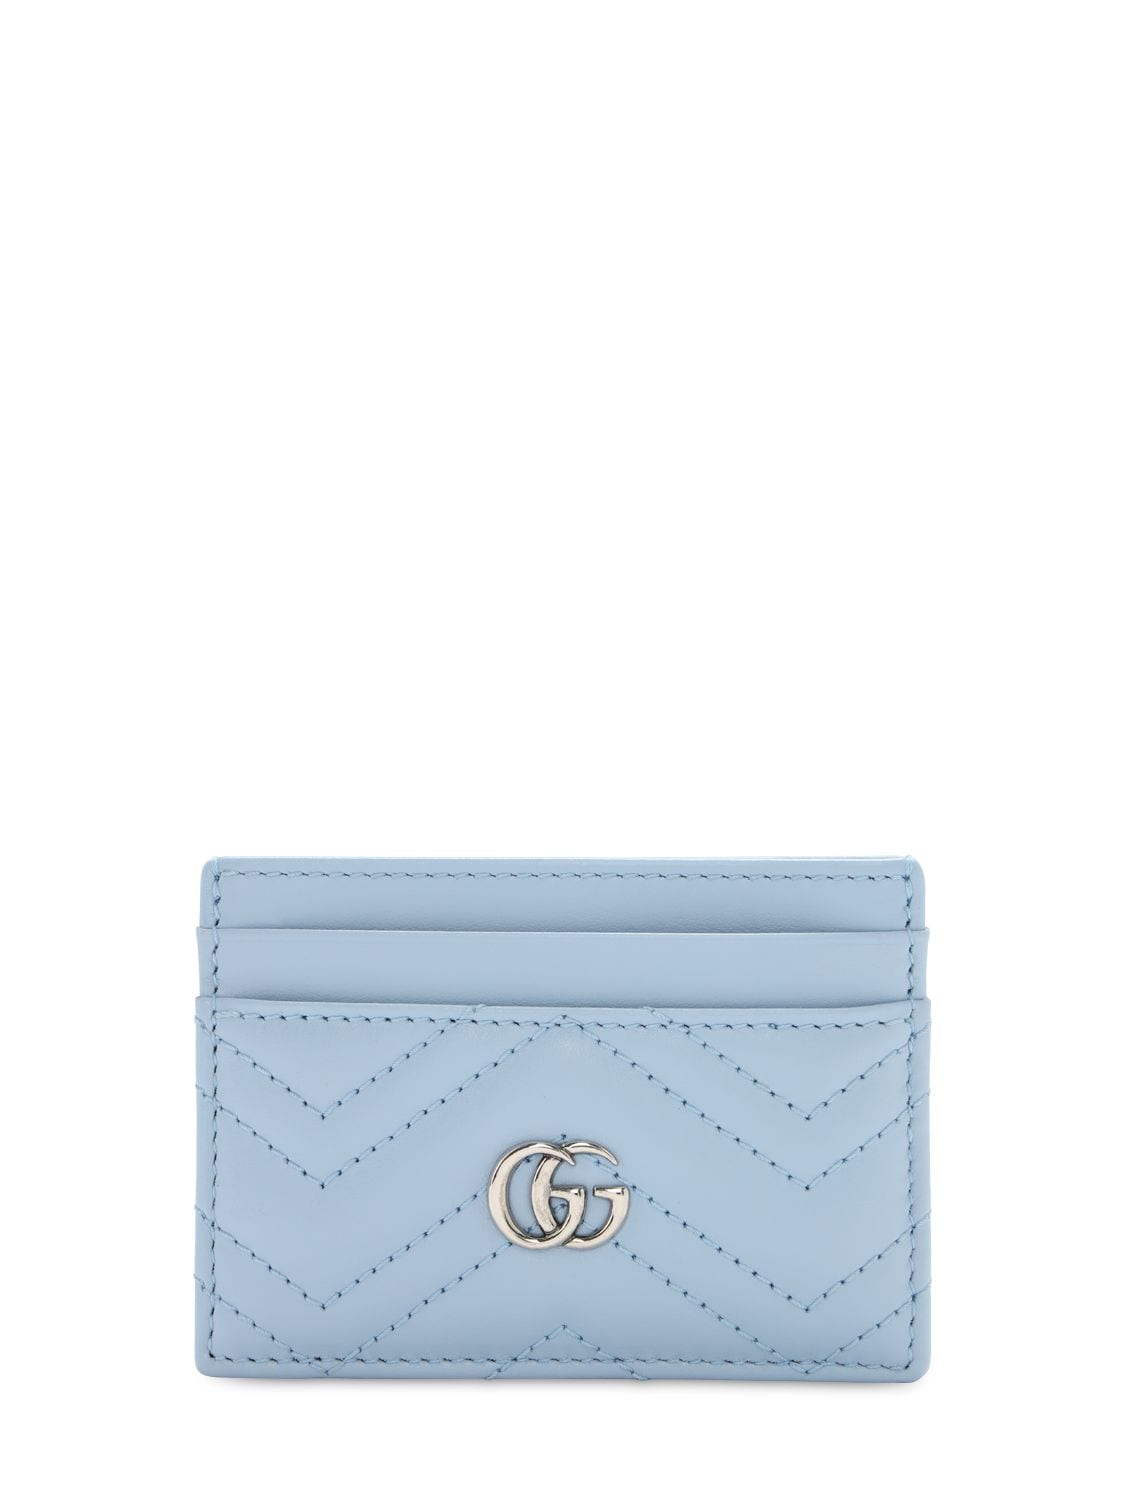 Gucci "gg Marmont"绗缝皮革卡包 In Light Blue